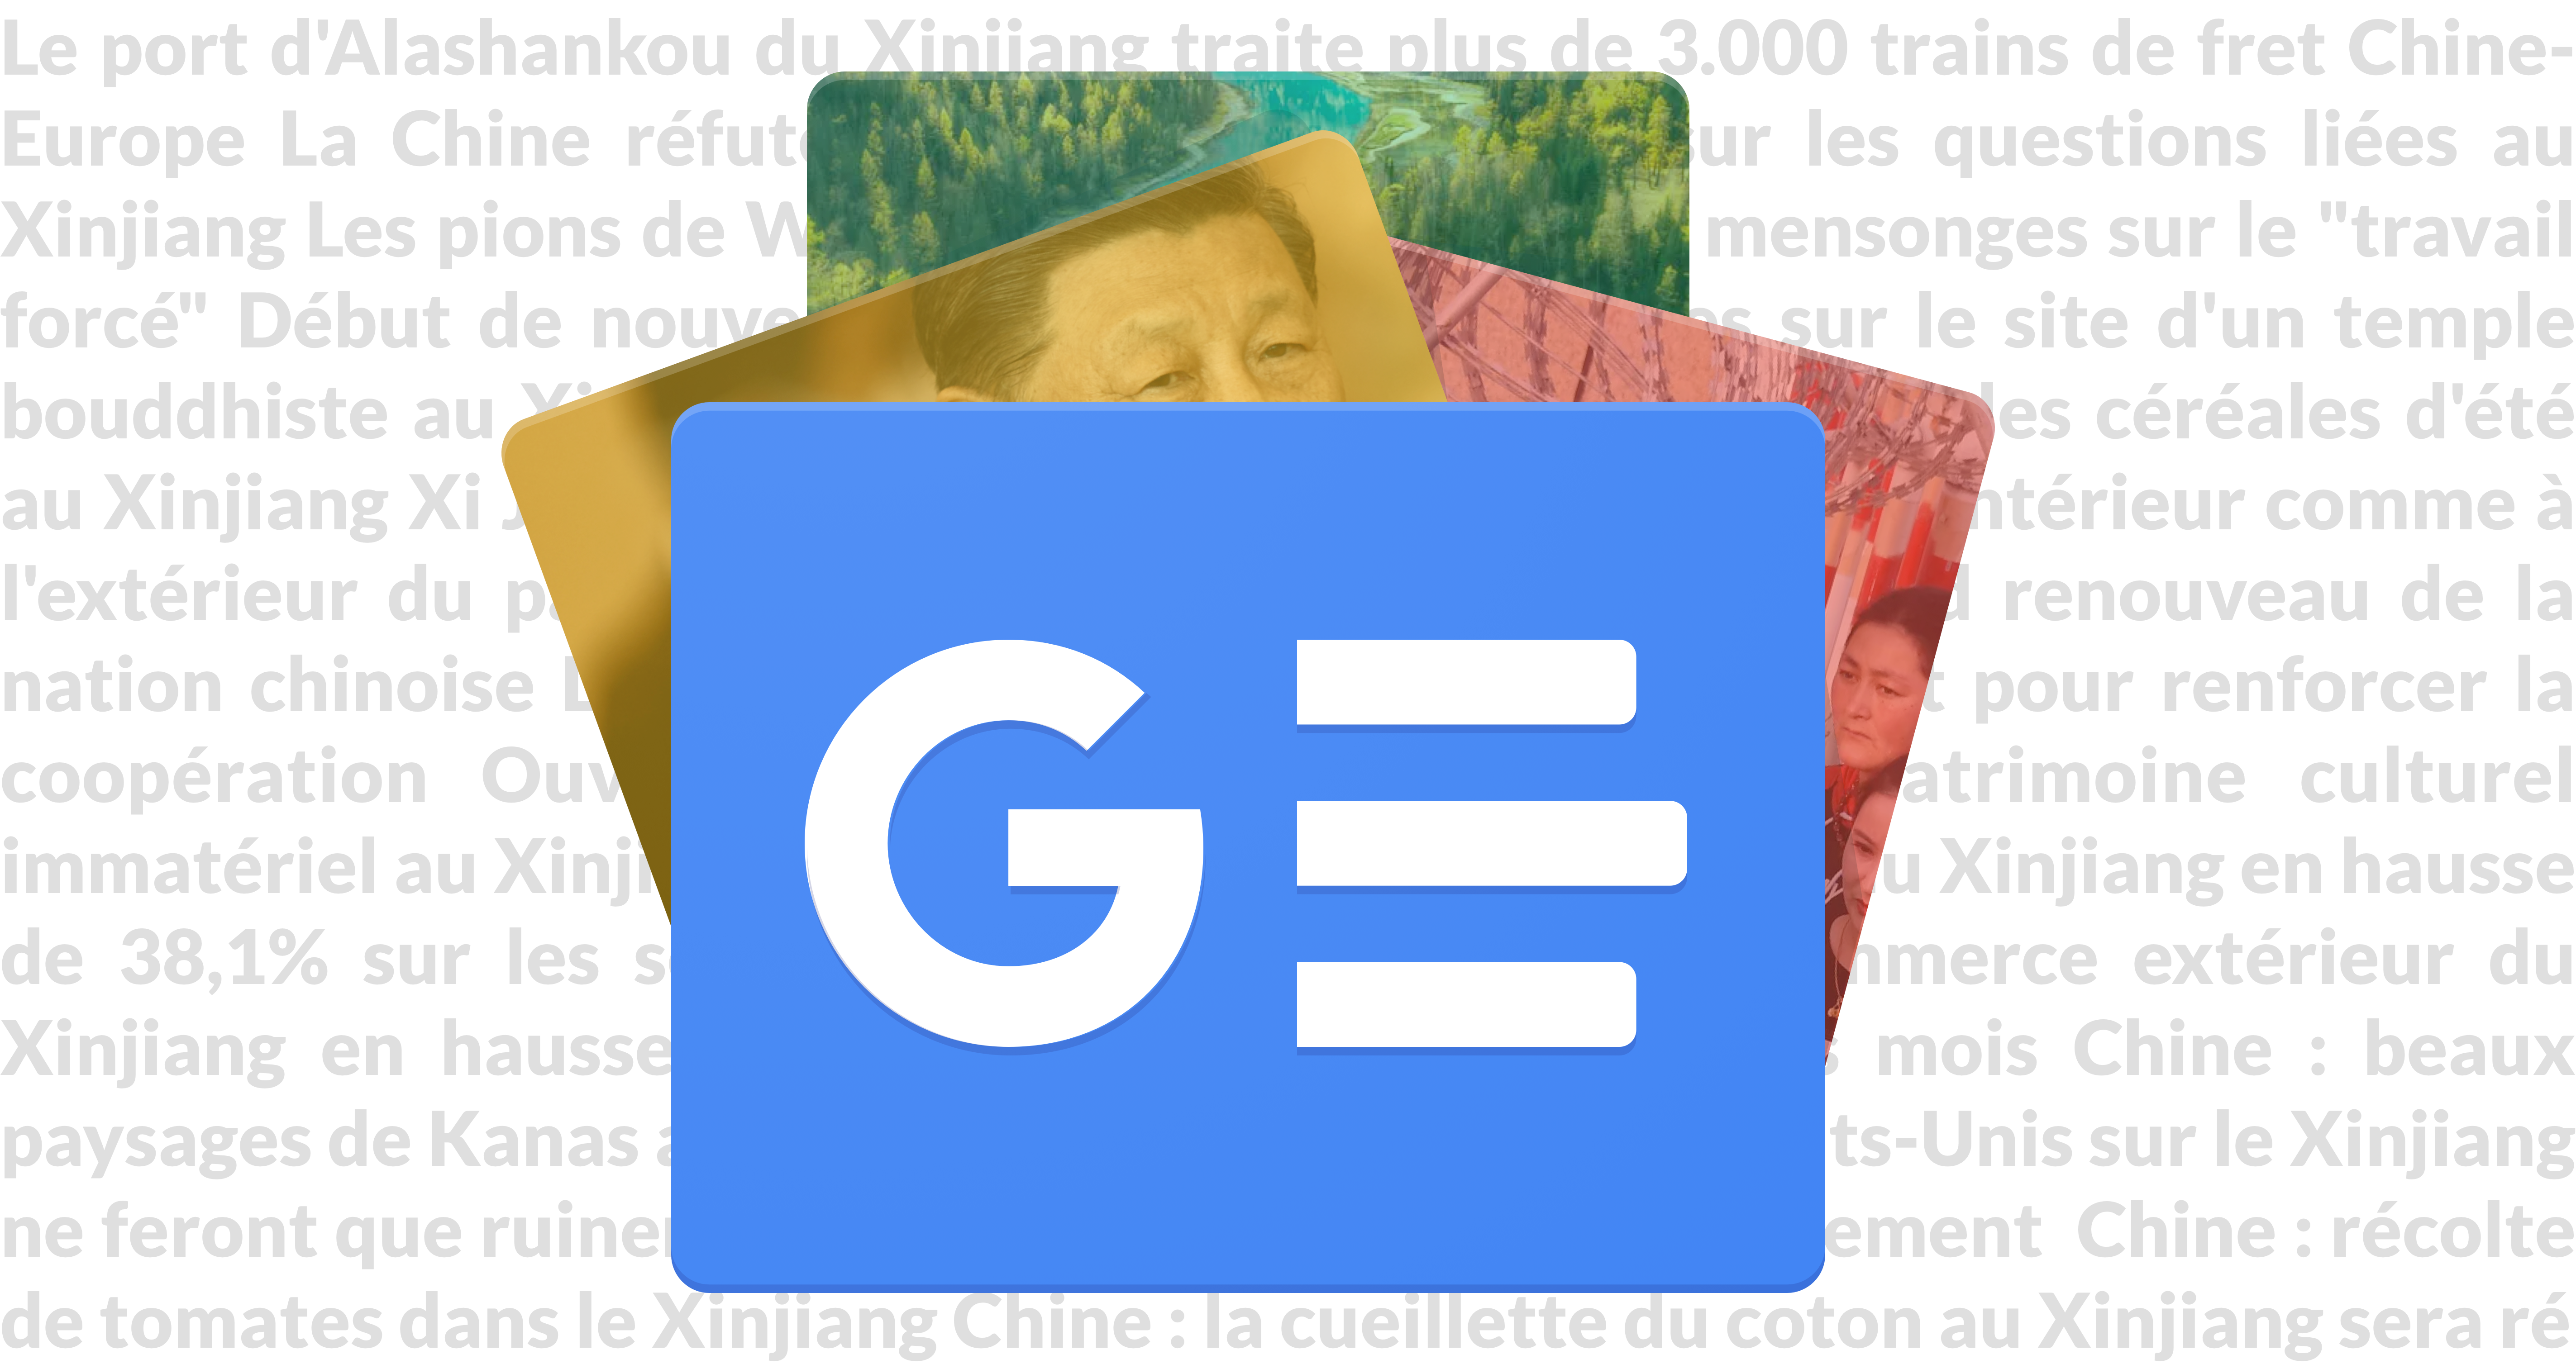 Is China trying to control the narrative about Xinjiang on Google News?